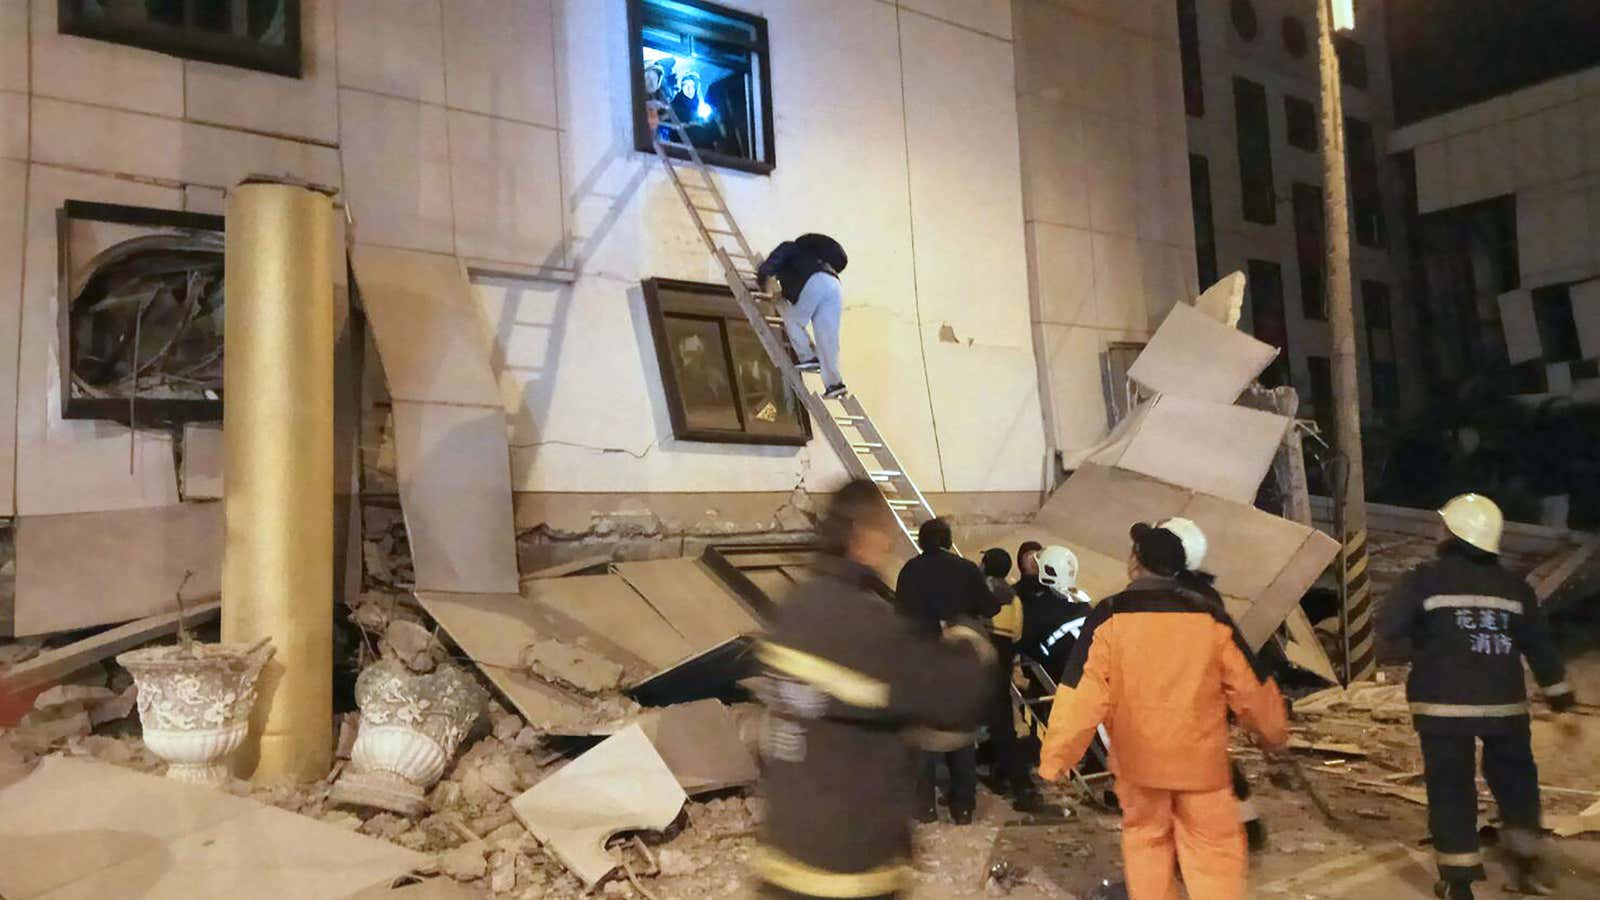 Rescue workers search through rubble outside the Marshal Hotel in Hualien, eastern Taiwan early Feb. 7, after a strong earthquake struck the island.